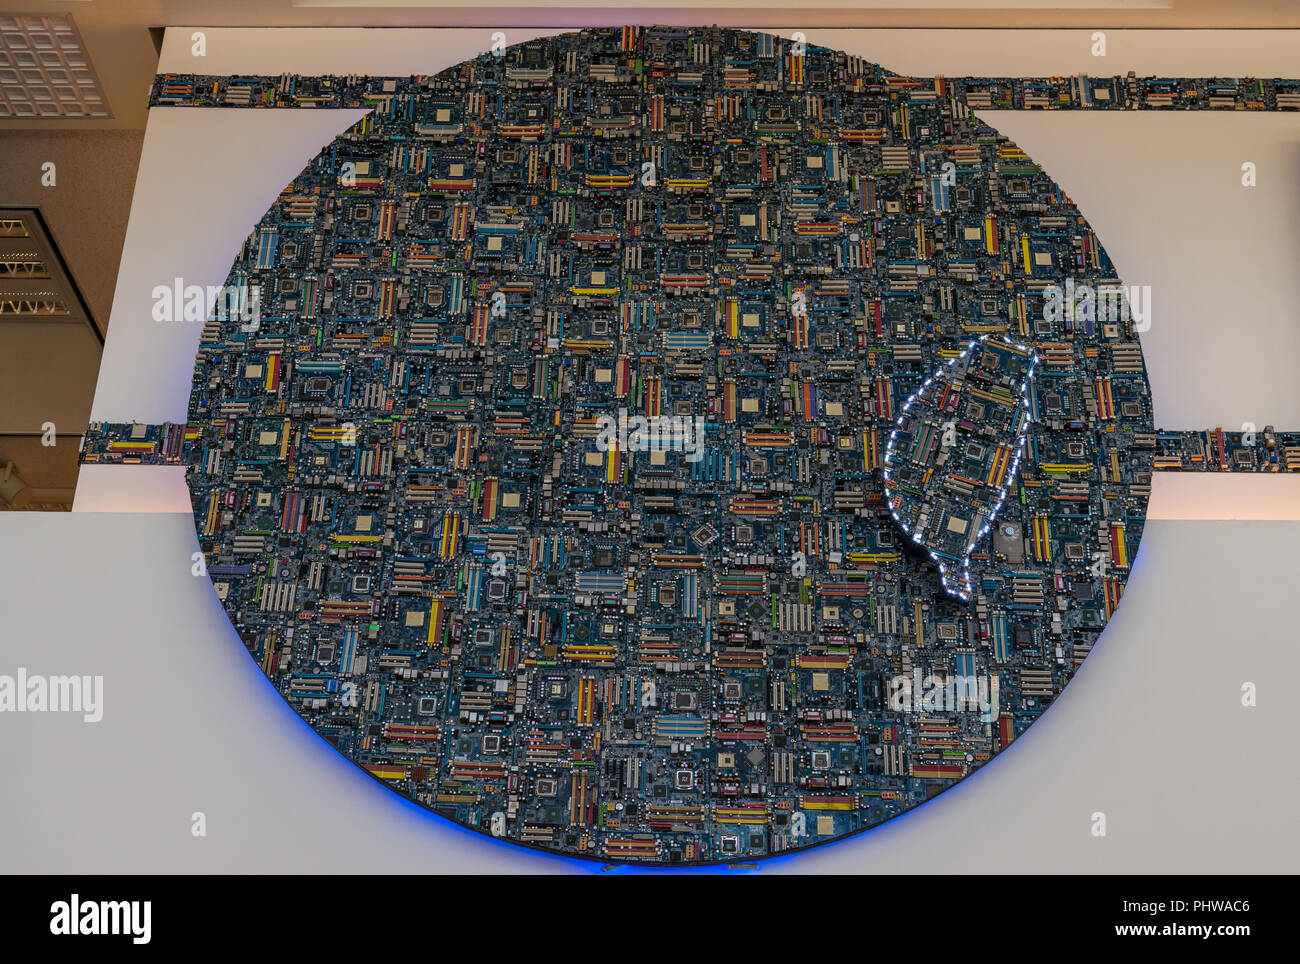 Wall decoration made of electronic circuit boards at Taoyuan International Airport shows their pride of electronics industry. Taiwan, China. Stock Photo